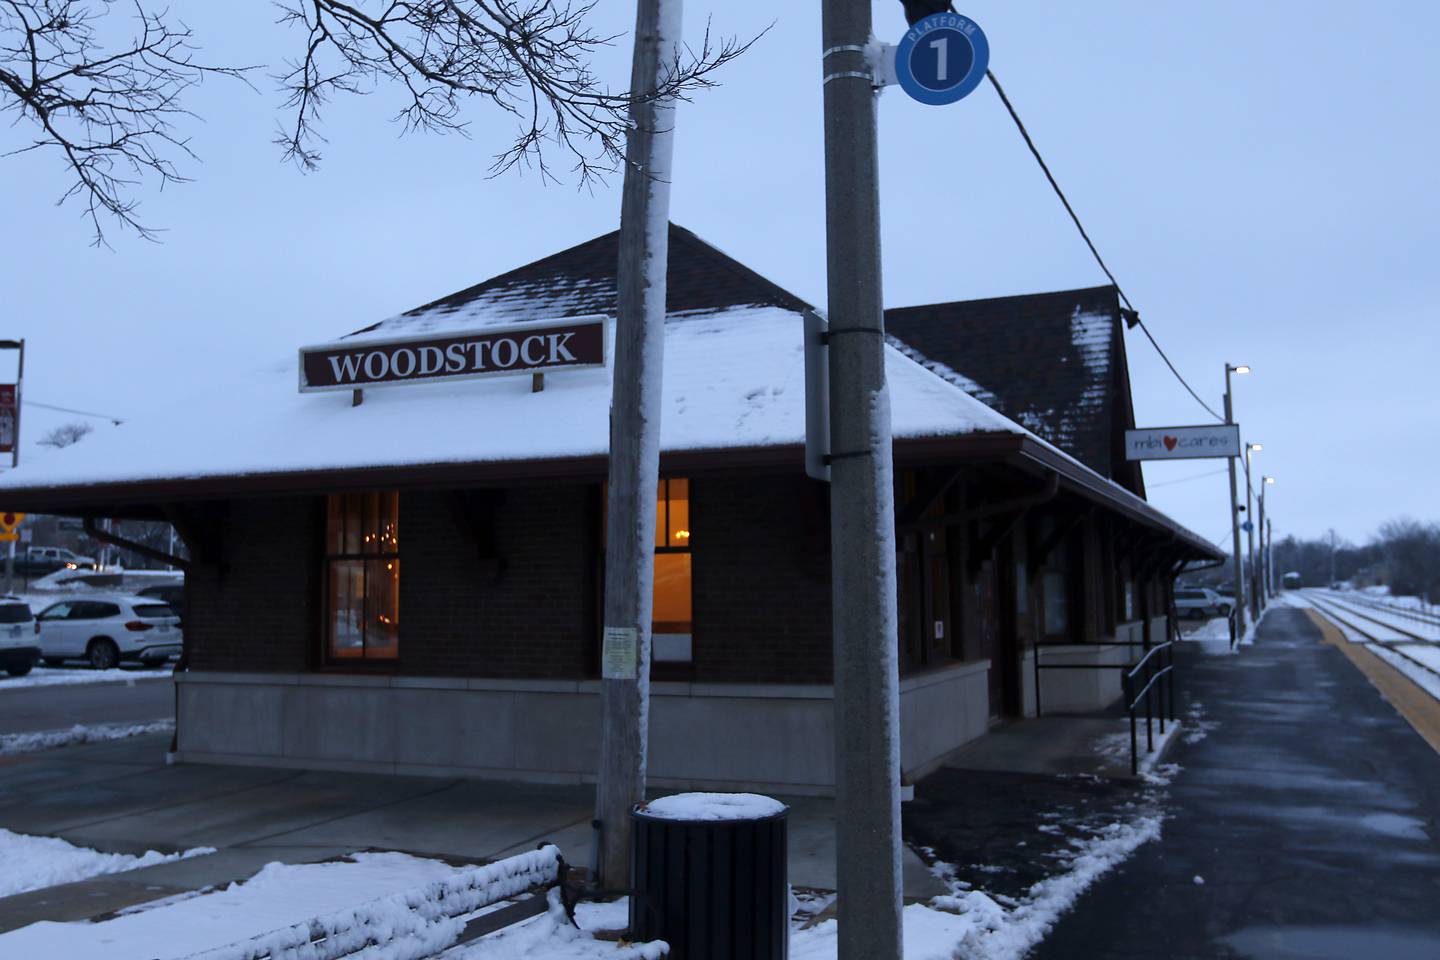 After a group asylum seekers were dropped at the train depot in Woodstock a group of volunteers including Rob Mutert and Tom Wilson of MBI jumped into action to help support them by opening the MBI Community Depot for as a warming stations  and by finding weather appropriate clothing.